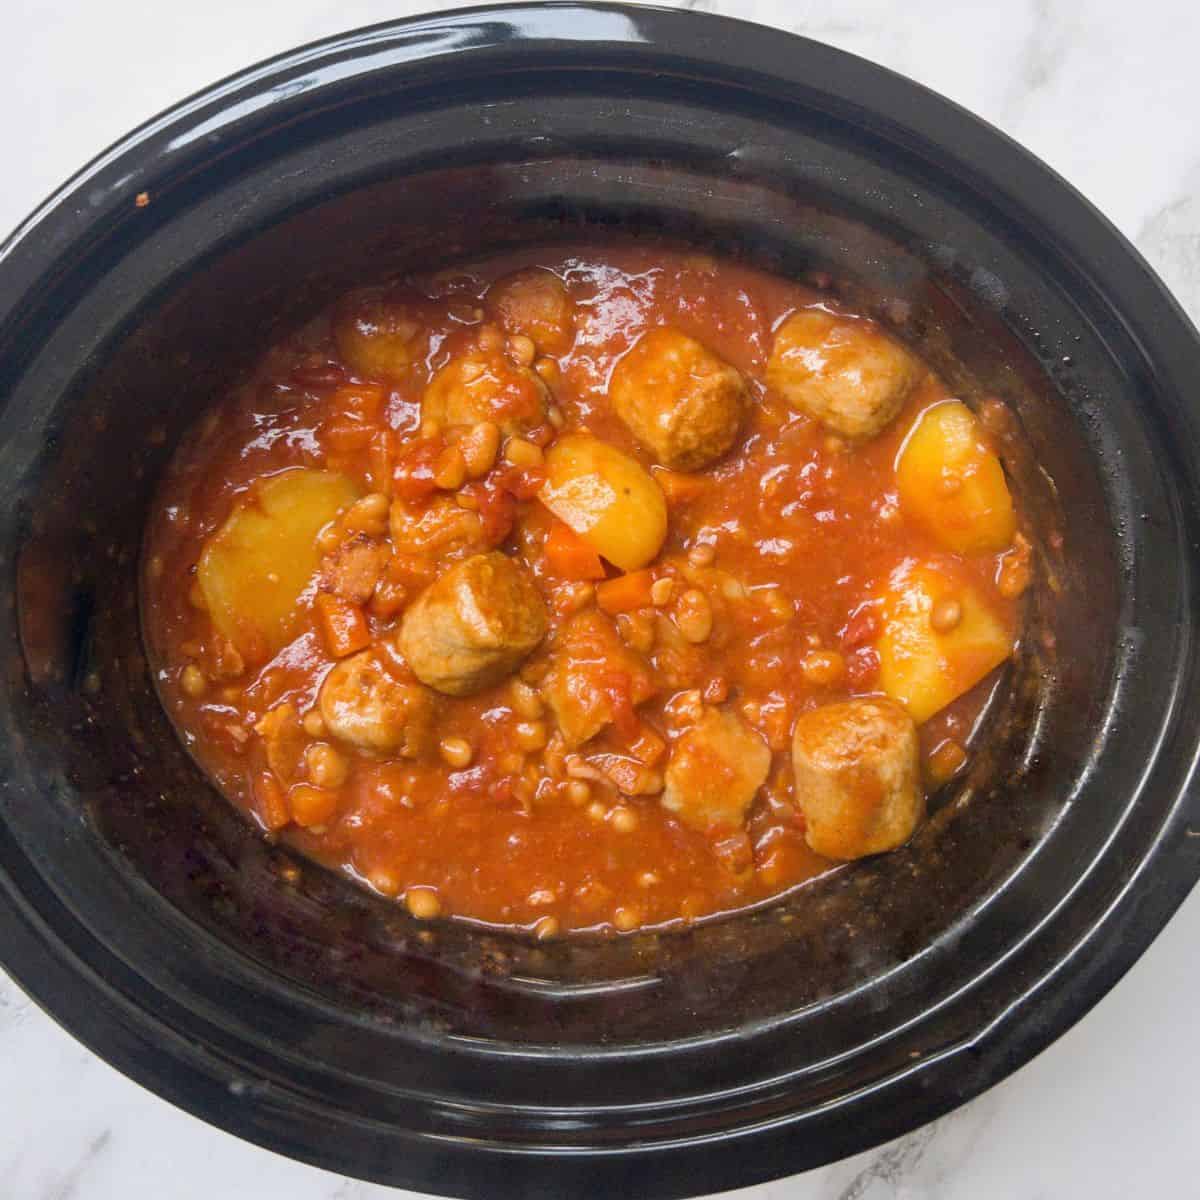 sausage and baked bean casserole cooking in the slow cooker.